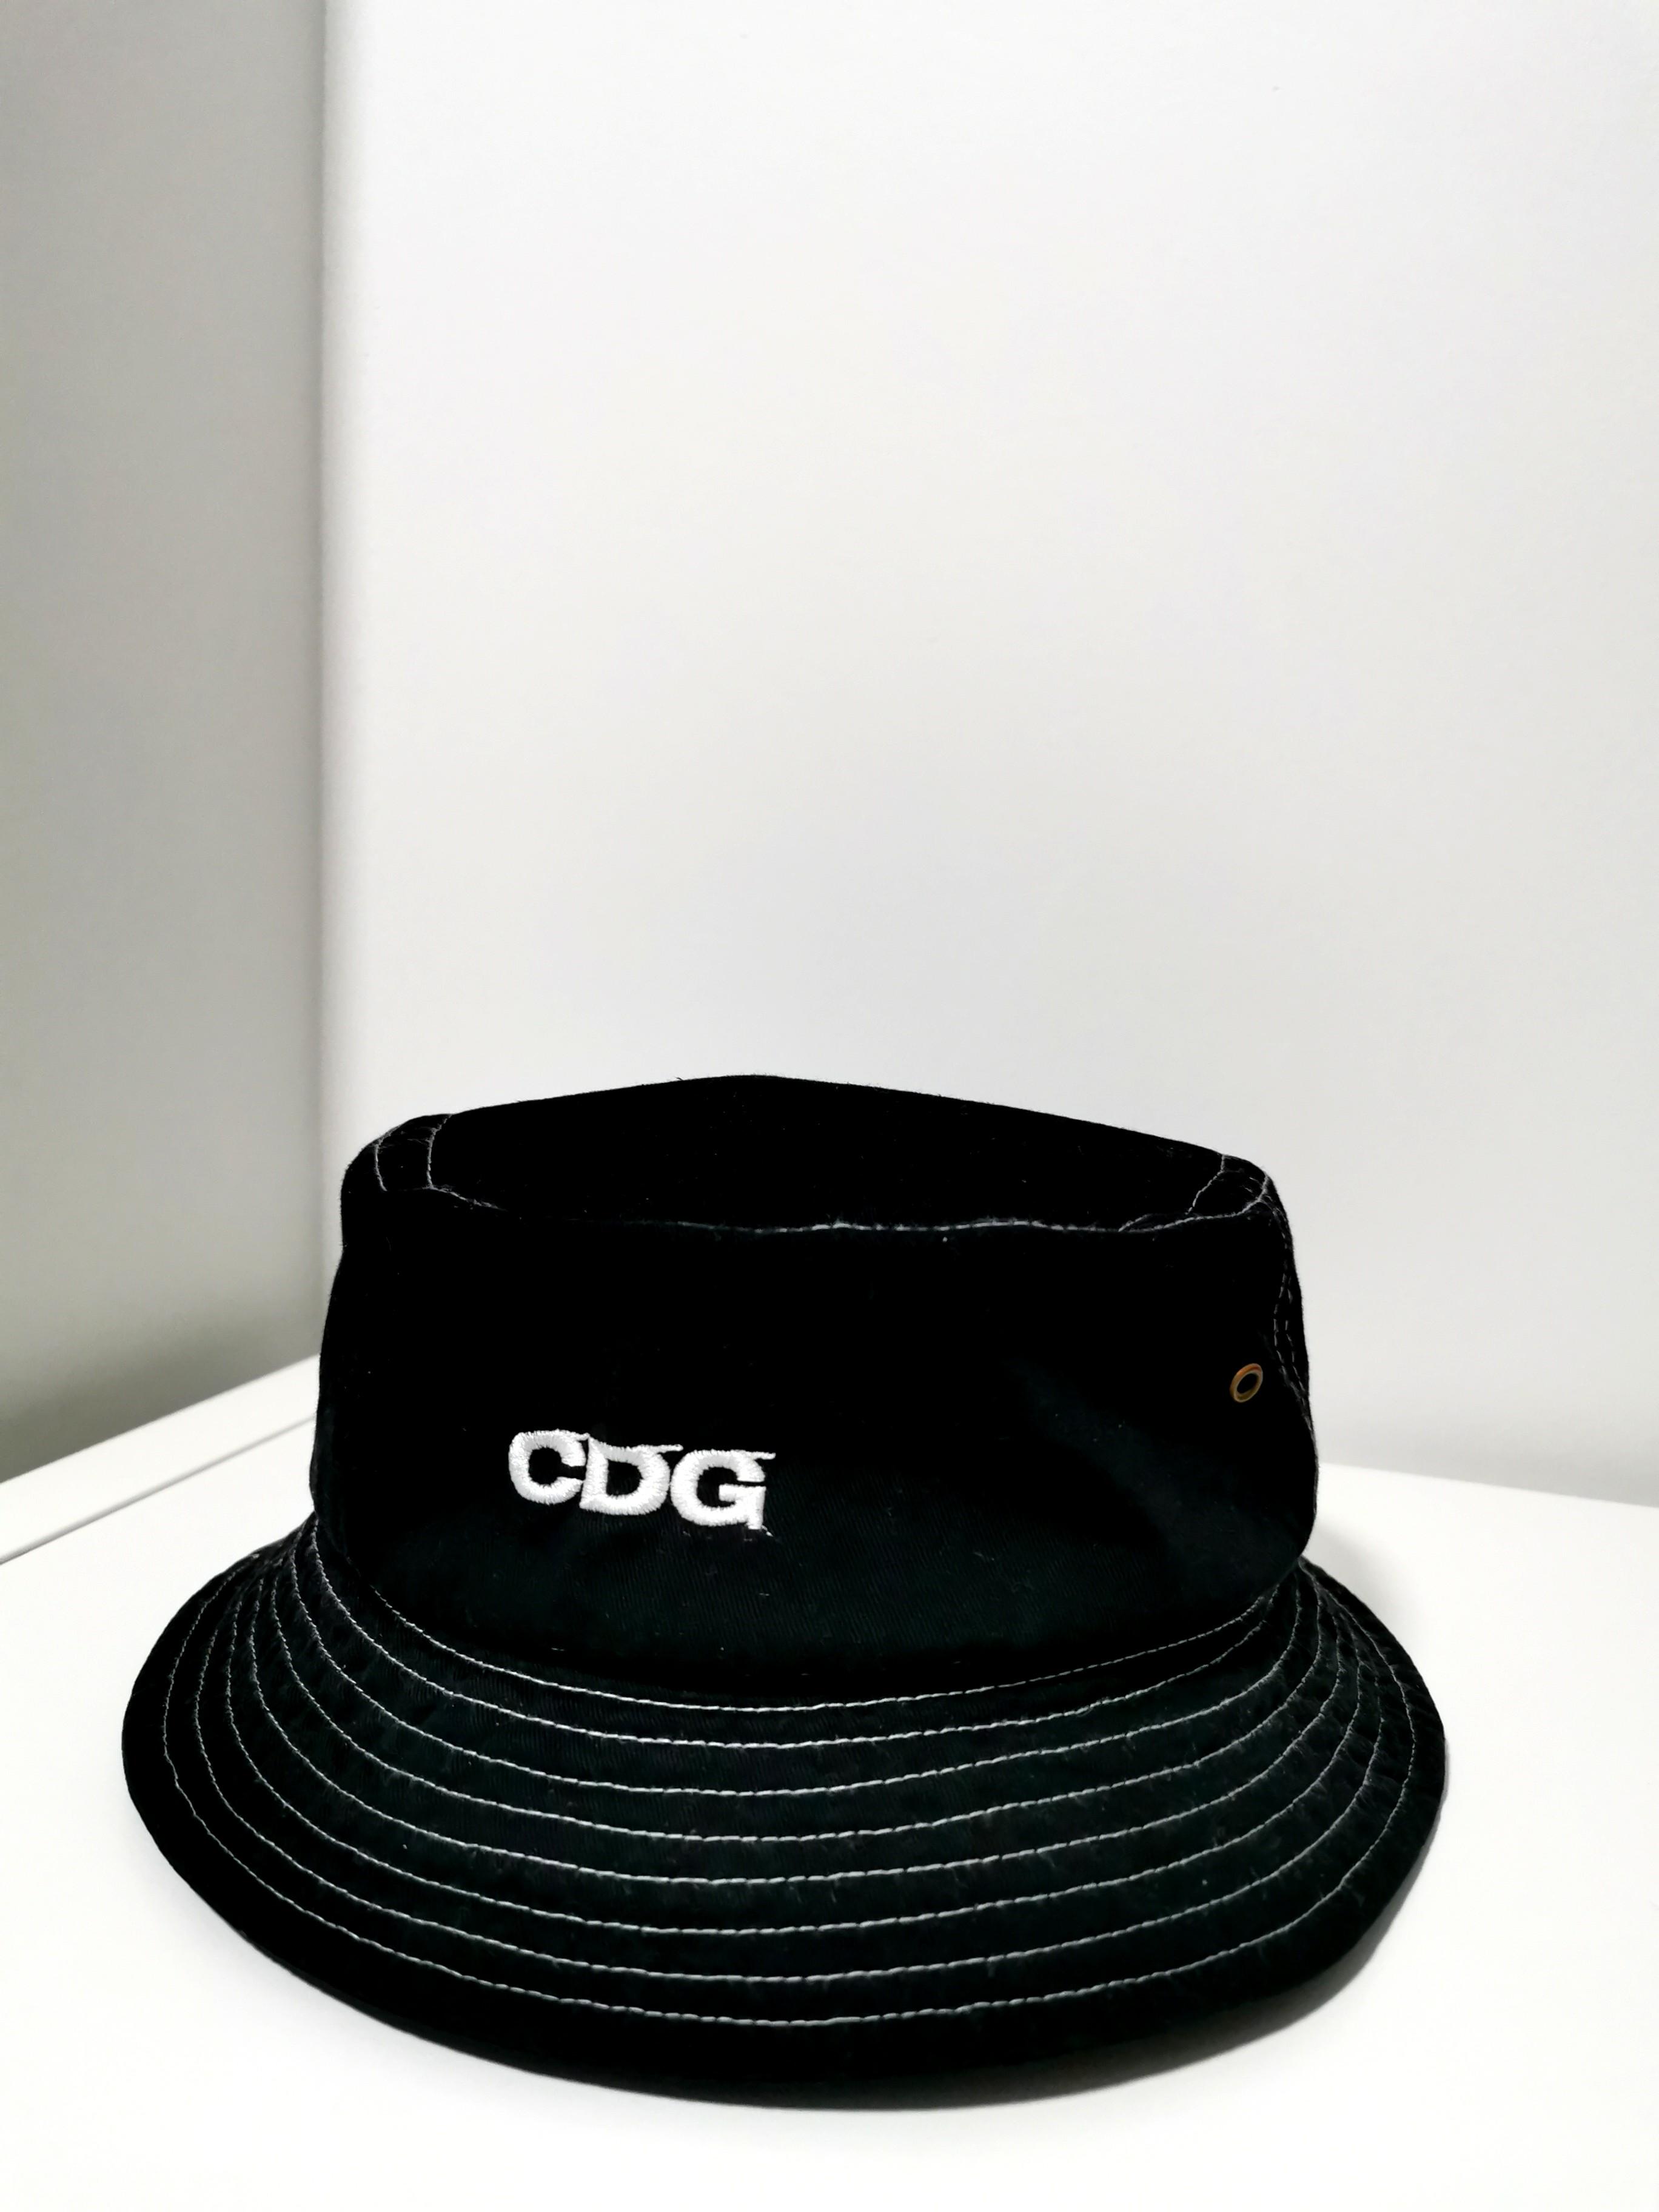 AUTHENTIC] CDG GARMENT DYED HAT, Men's Fashion, Watches